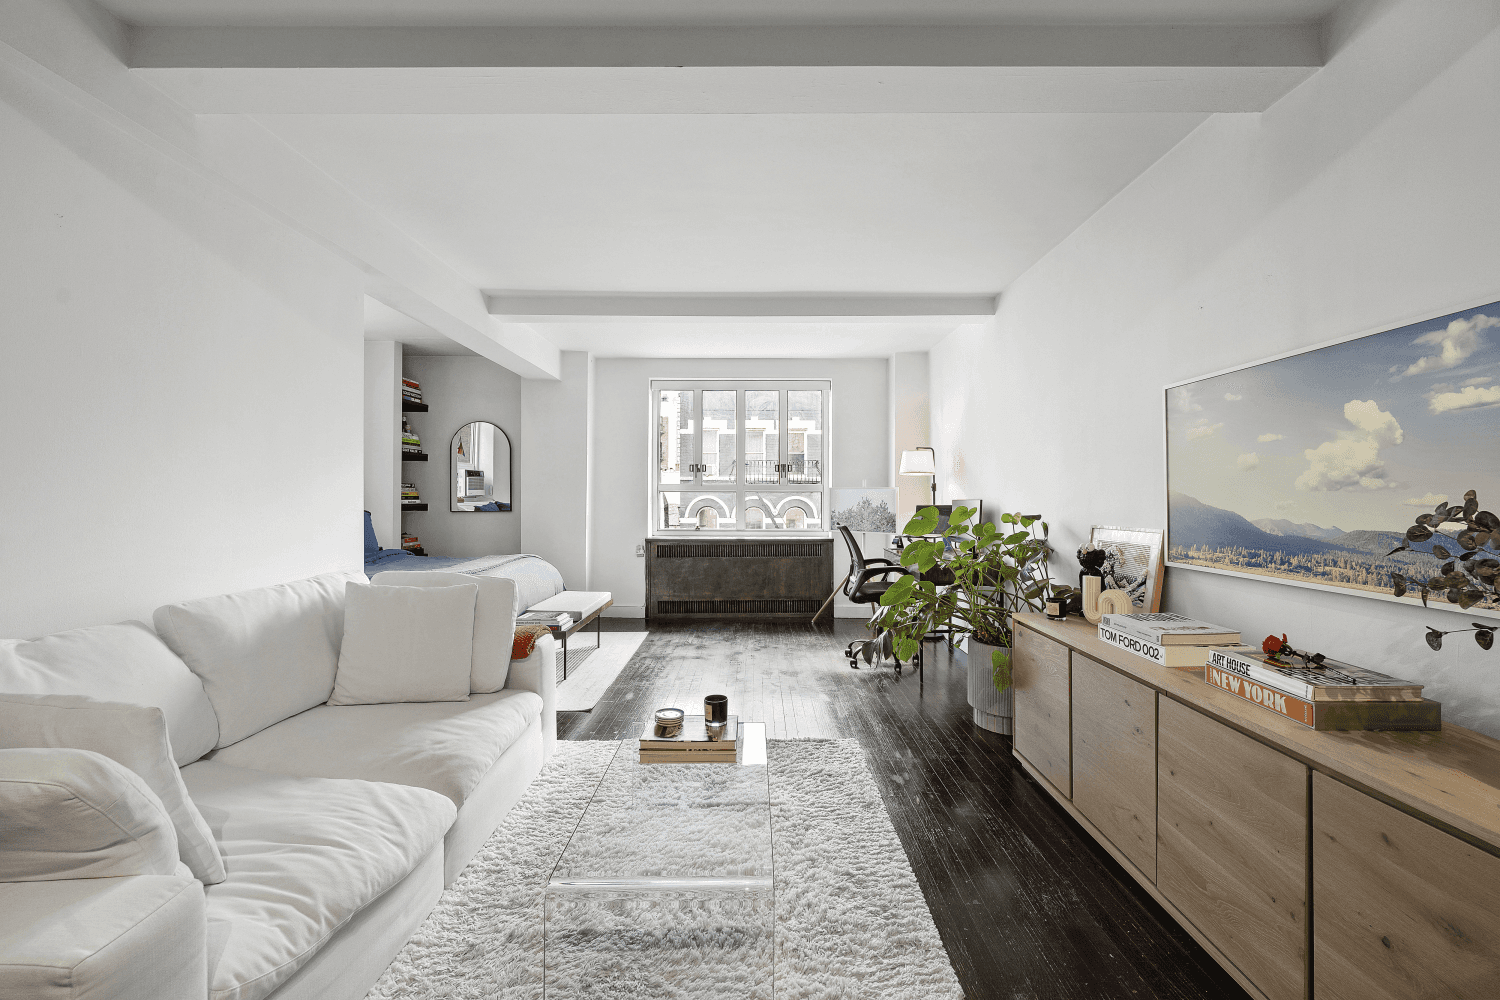 Chic Chelsea Alcove Studio in Beautiful Emery Roth Building Enjoy a classic Chelsea lifestyle in this sun splashed 1 bathroom alcove studio close to Chelsea Market, Eataly, and Madison Square ...